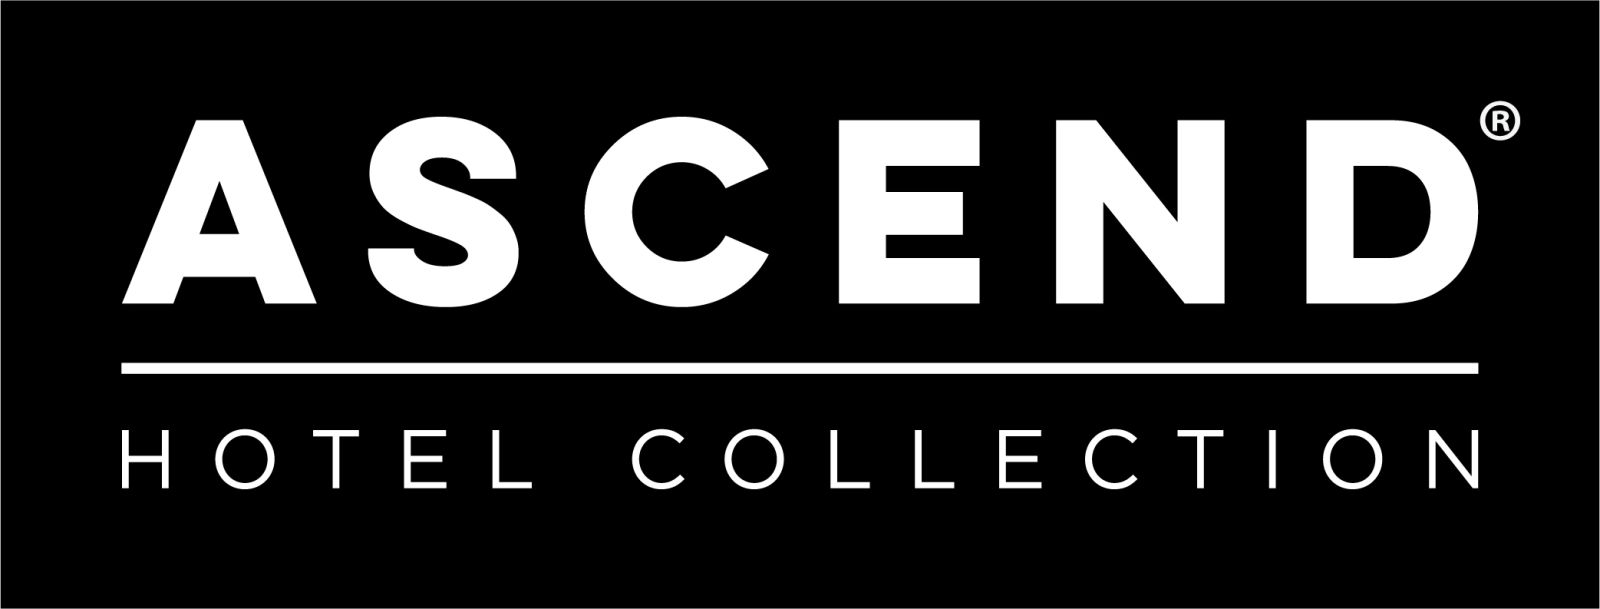 Ascend Collection banner